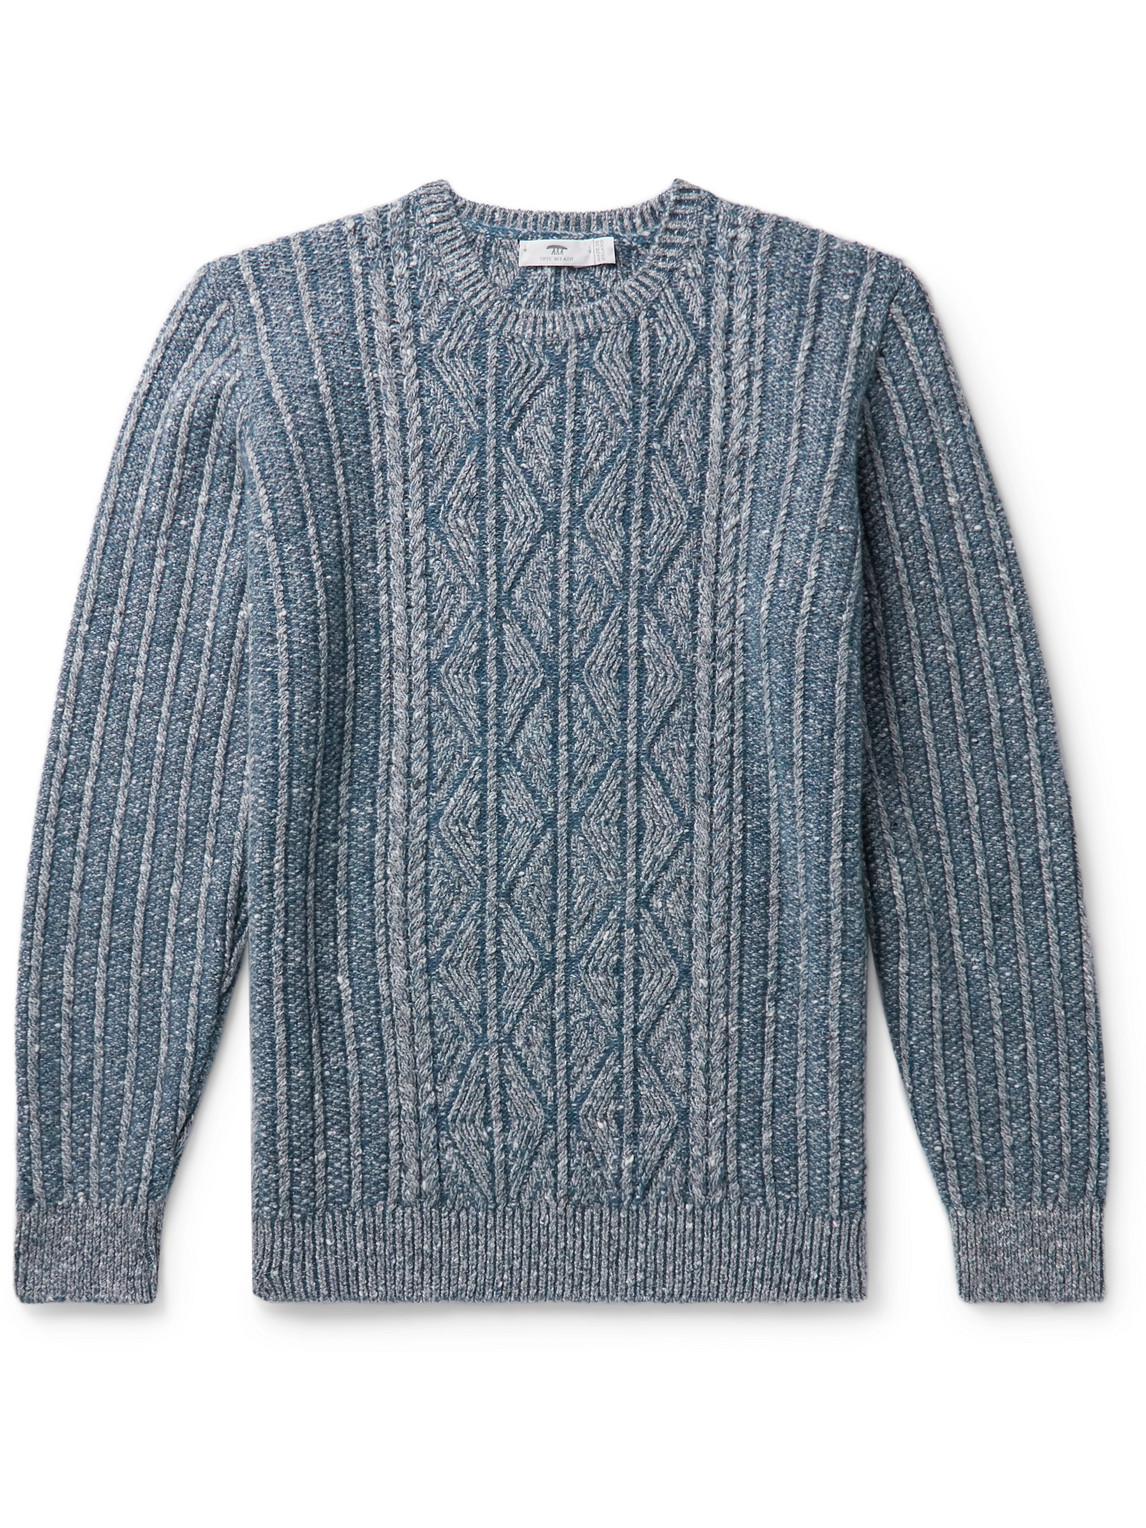 Inis Meain Aran-knit Merino Wool And Cashmere-blend Jumper In Blue